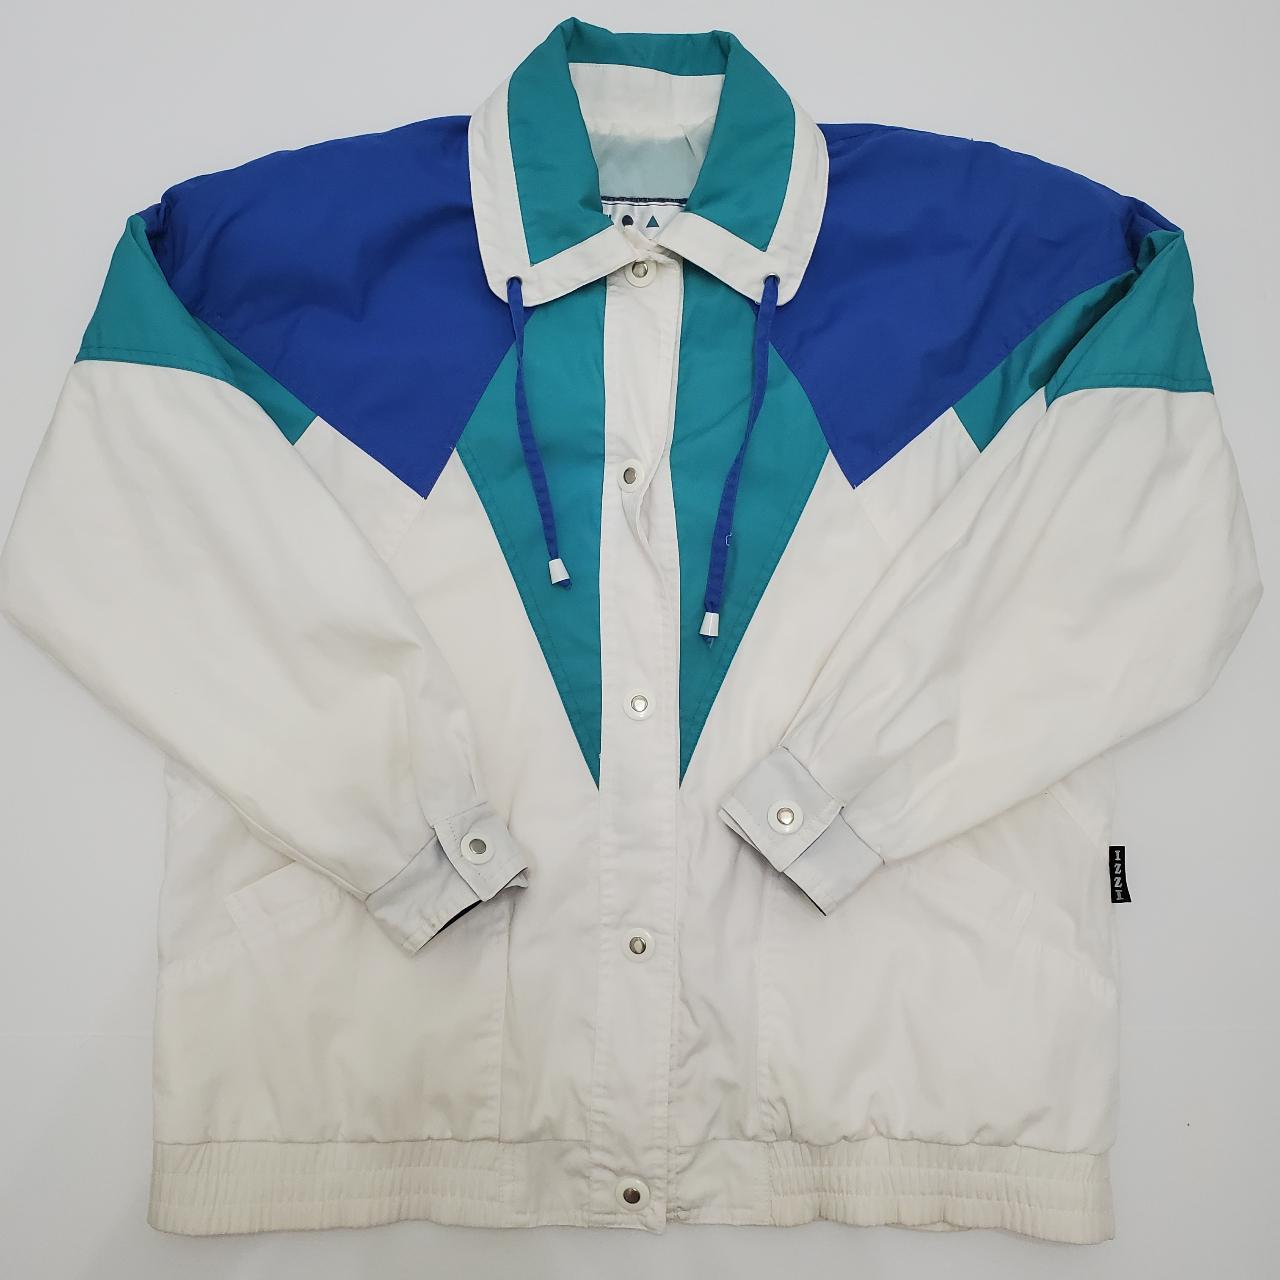 Women's White and Blue Jacket | Depop